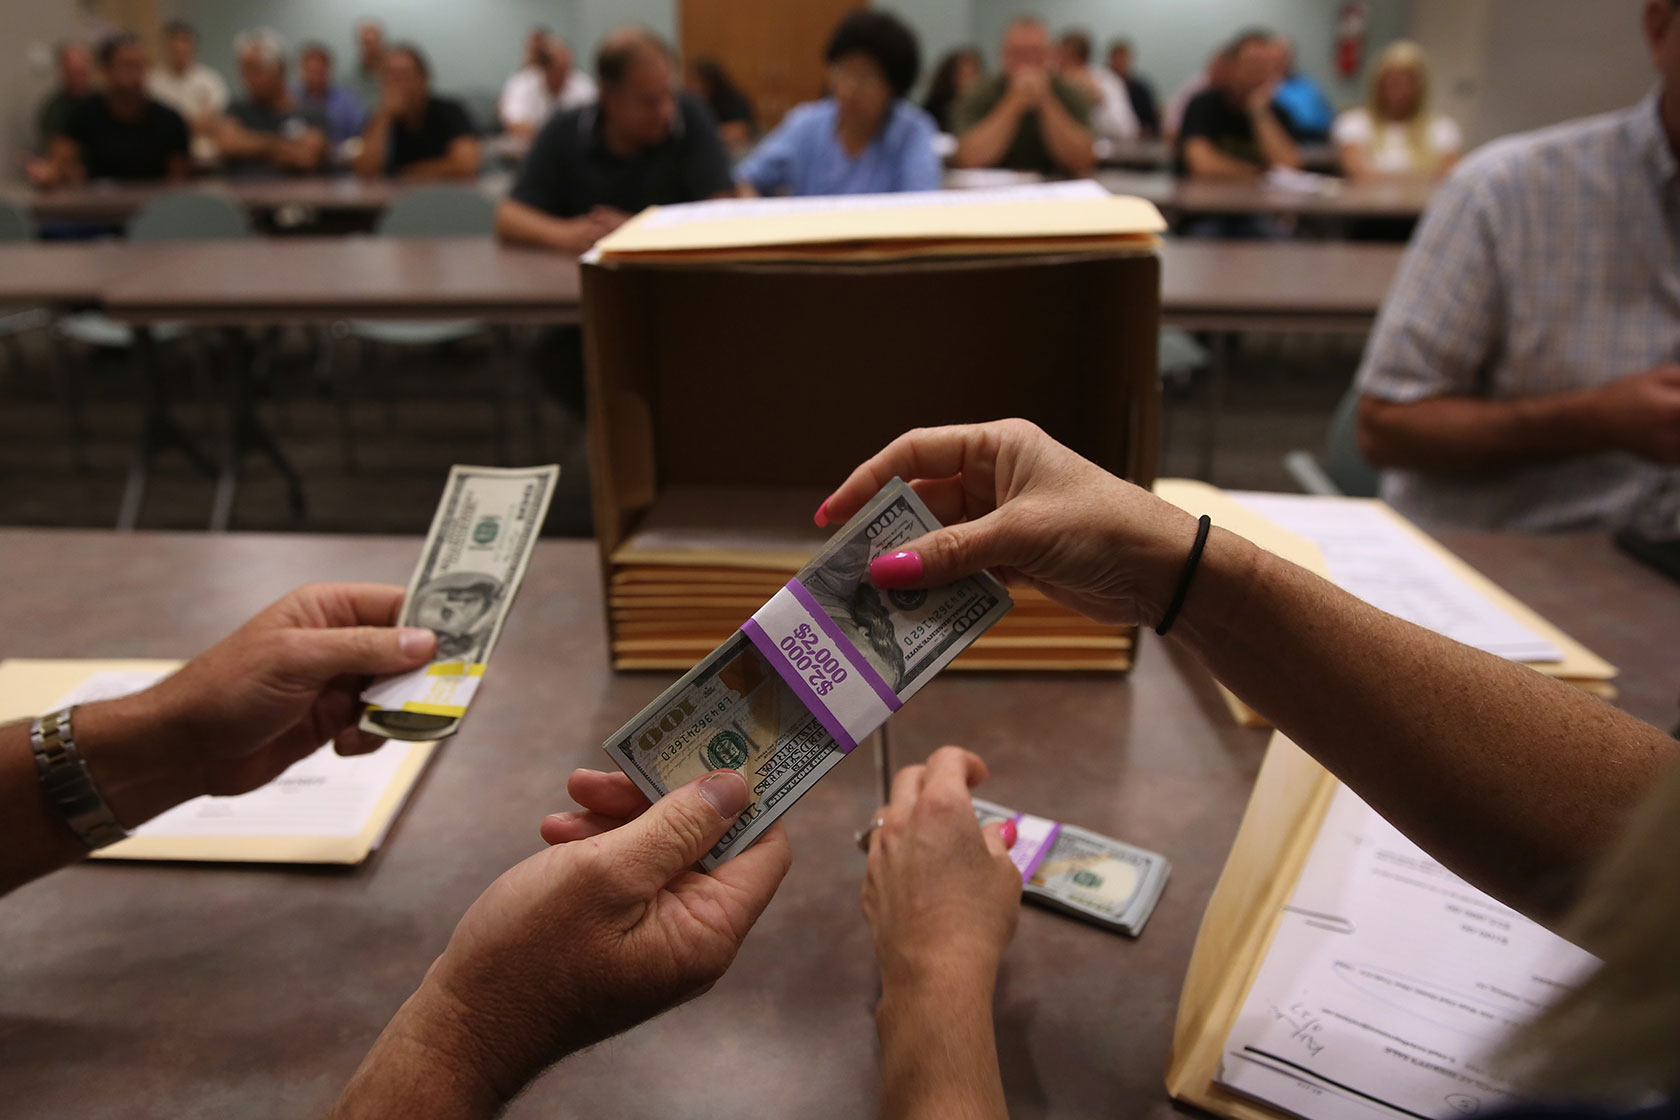 Photo shows two hands exchange bundles of 100 dollar bills in front of rows of people sitting in a courthouse